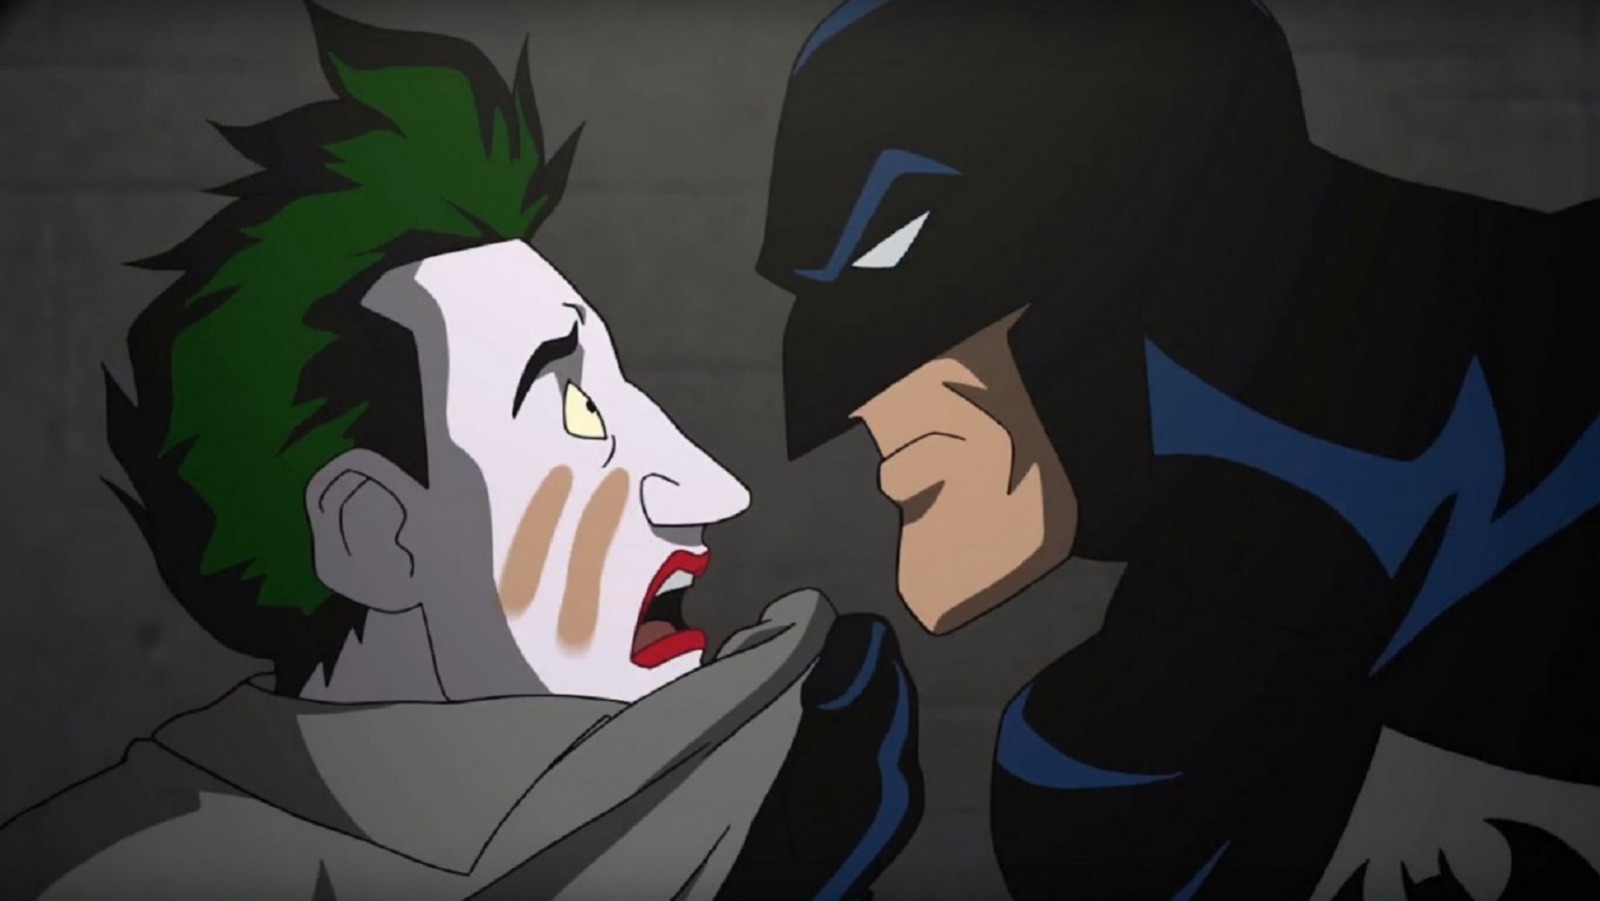 The Controversial Batman Movie That's Dominating Netflix